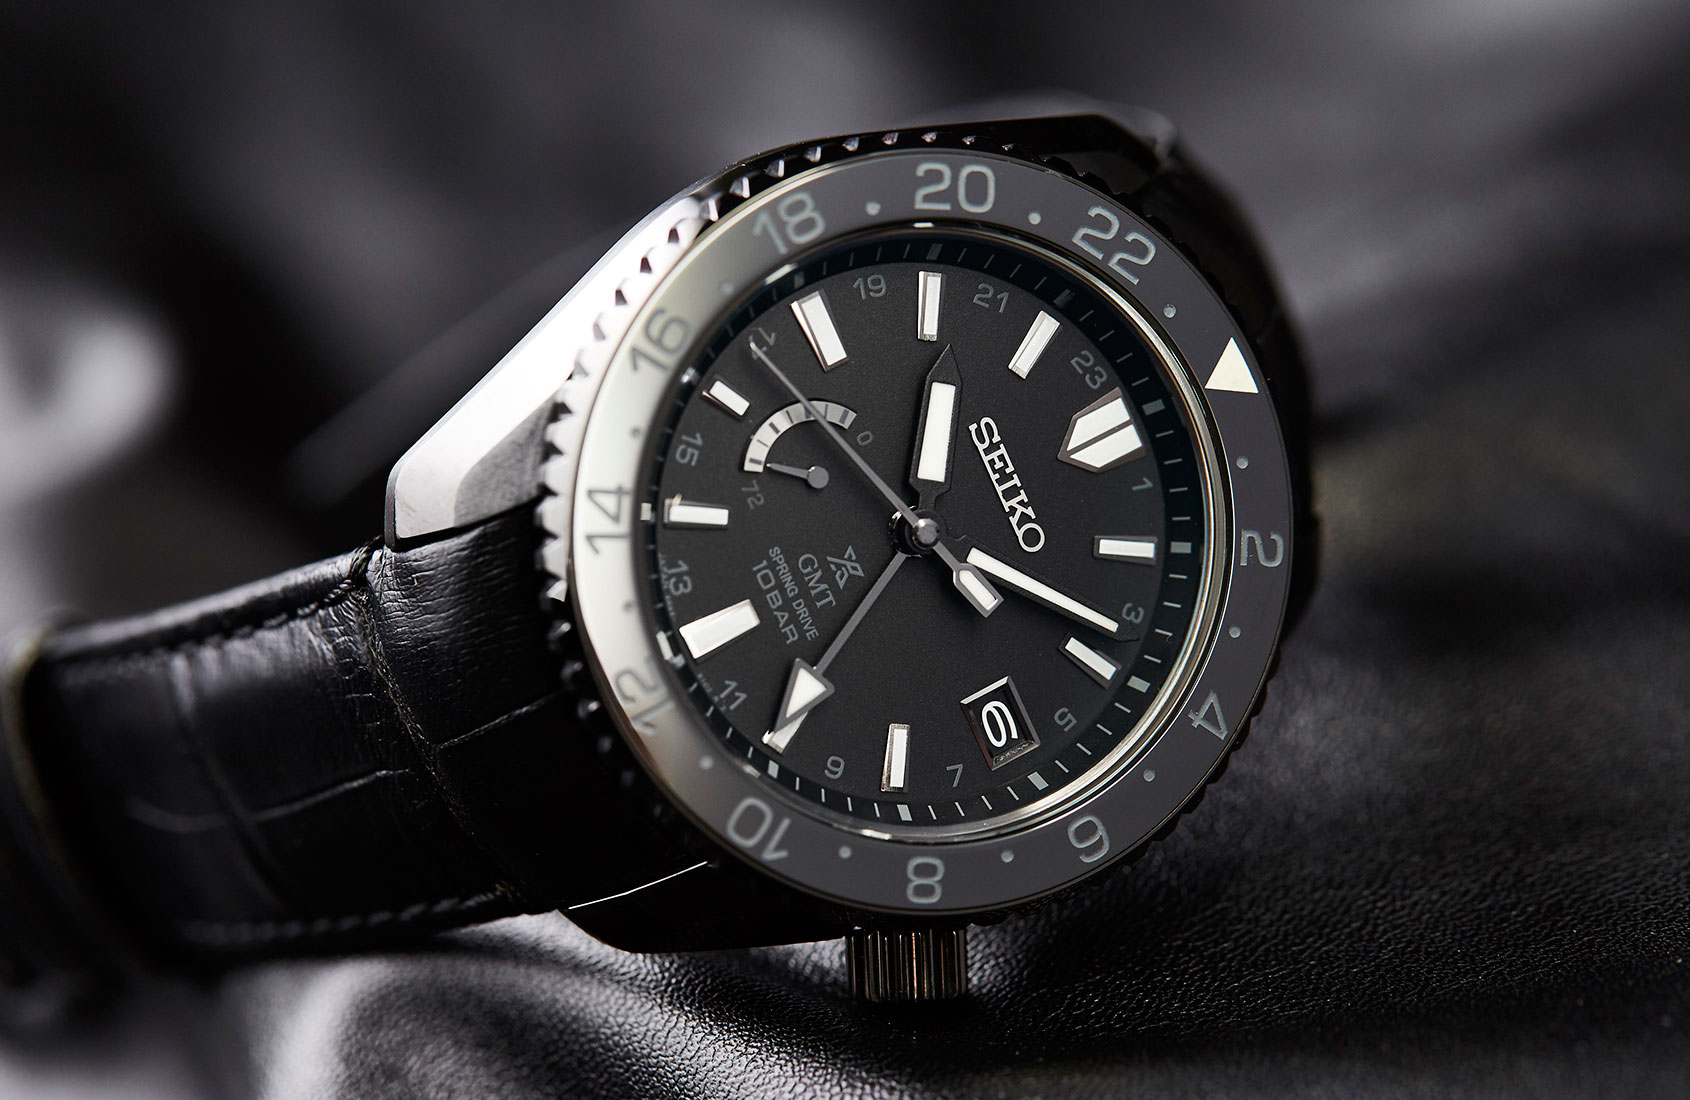 The Seiko Prospex LX looks it's been sent put a hit on anyone that its (high) price point - Time and Tide Watches